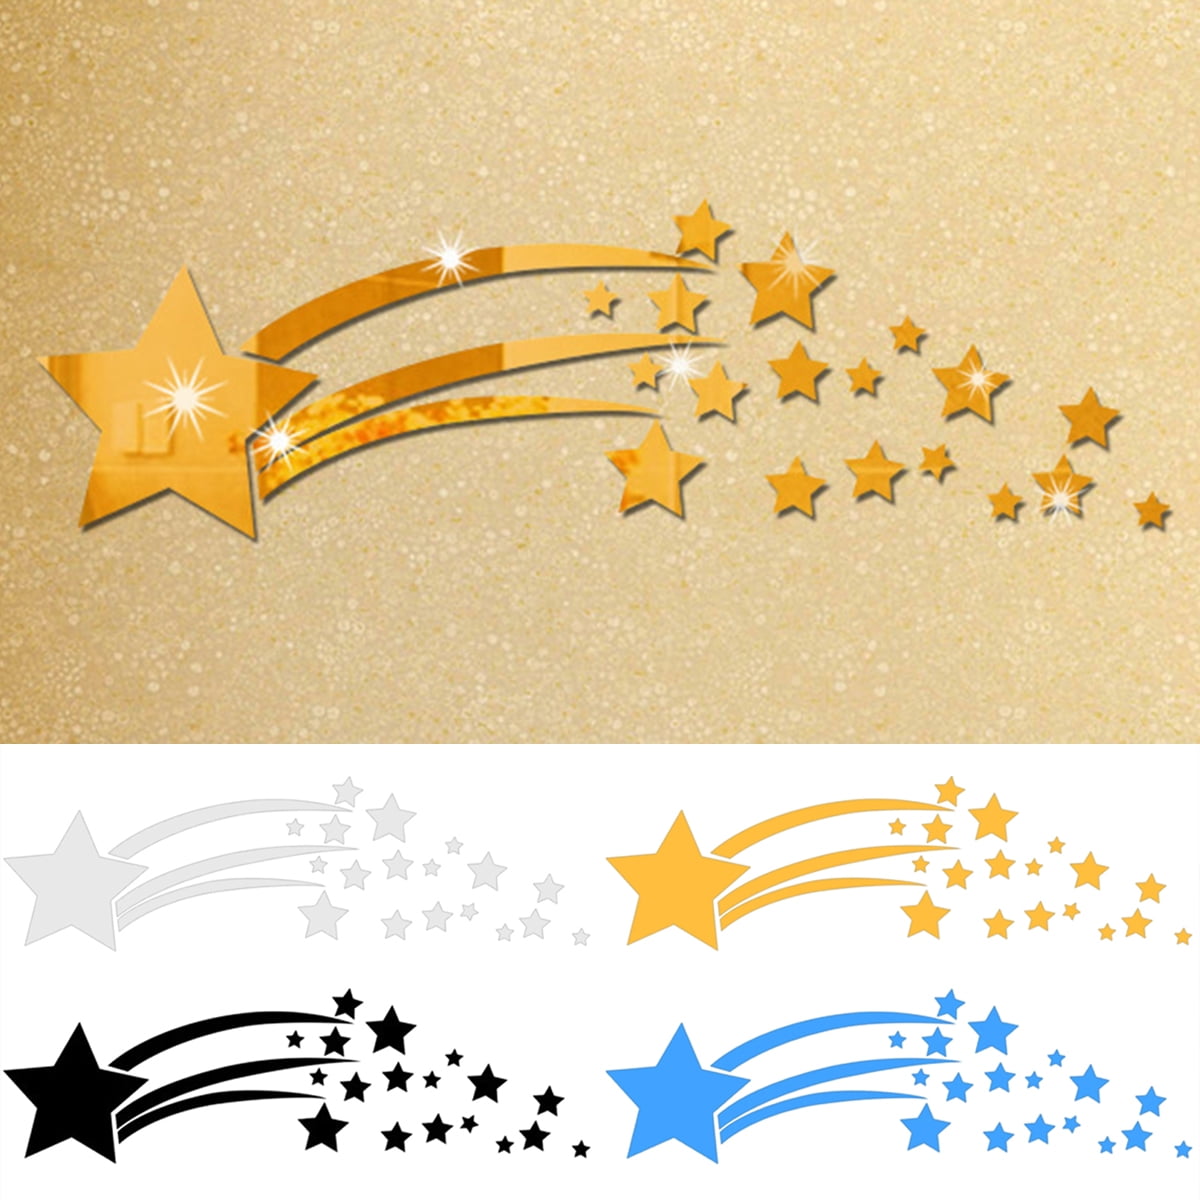 Wall Sticker Universe Shooting Shiny Star Reflective Wall Decals Home Decoration 